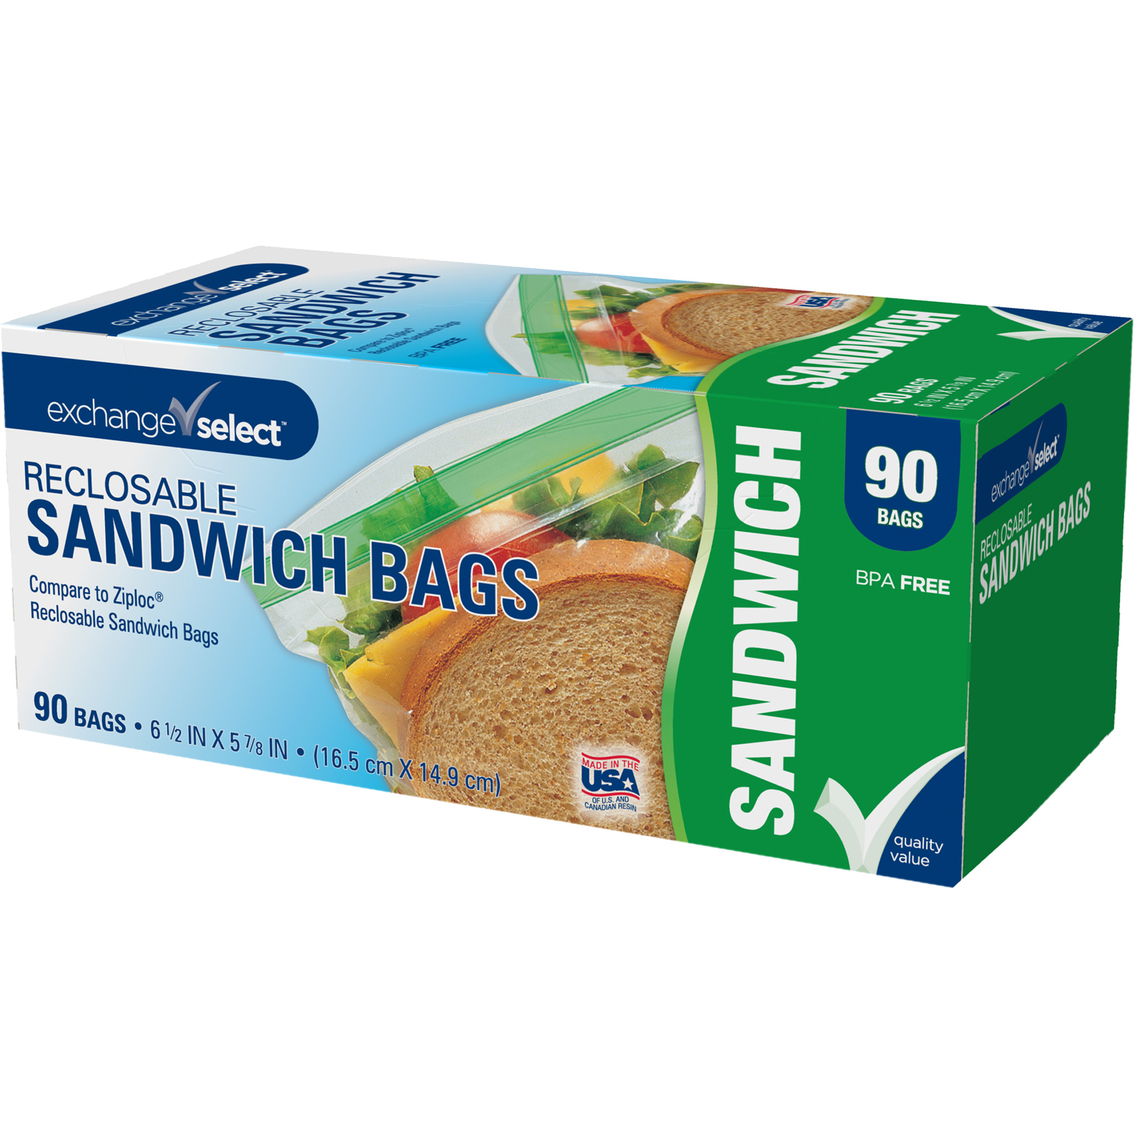 Exchange Select Reclosable Sandwich Bags 90 ct. - Image 4 of 4